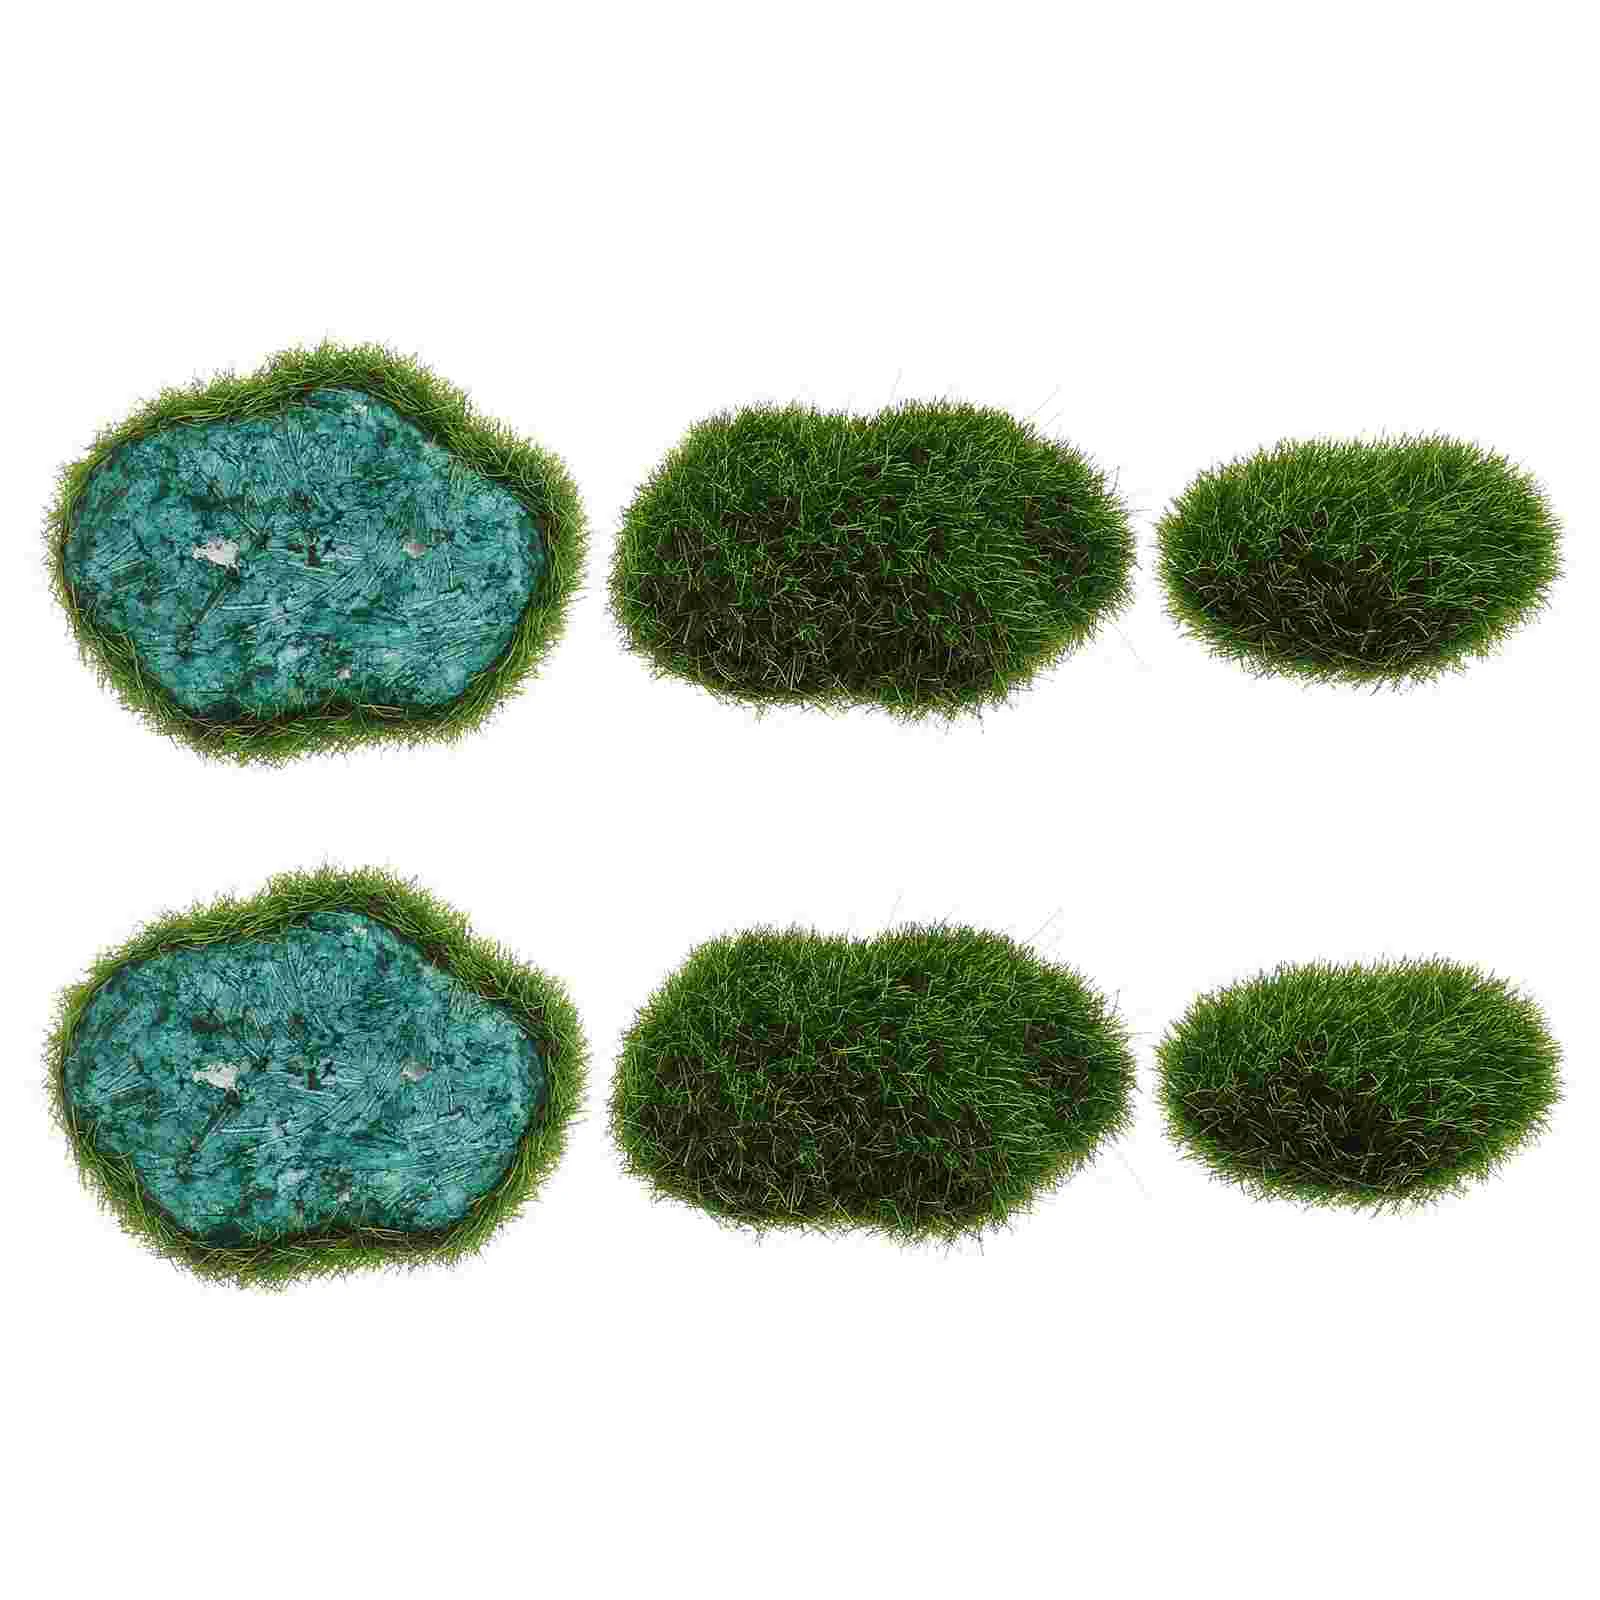 

6pcs Mossy Stone Artificial Moss Rocks Decorative Green Moss Covered Stones Moss for DIY Floral Arrangements Green